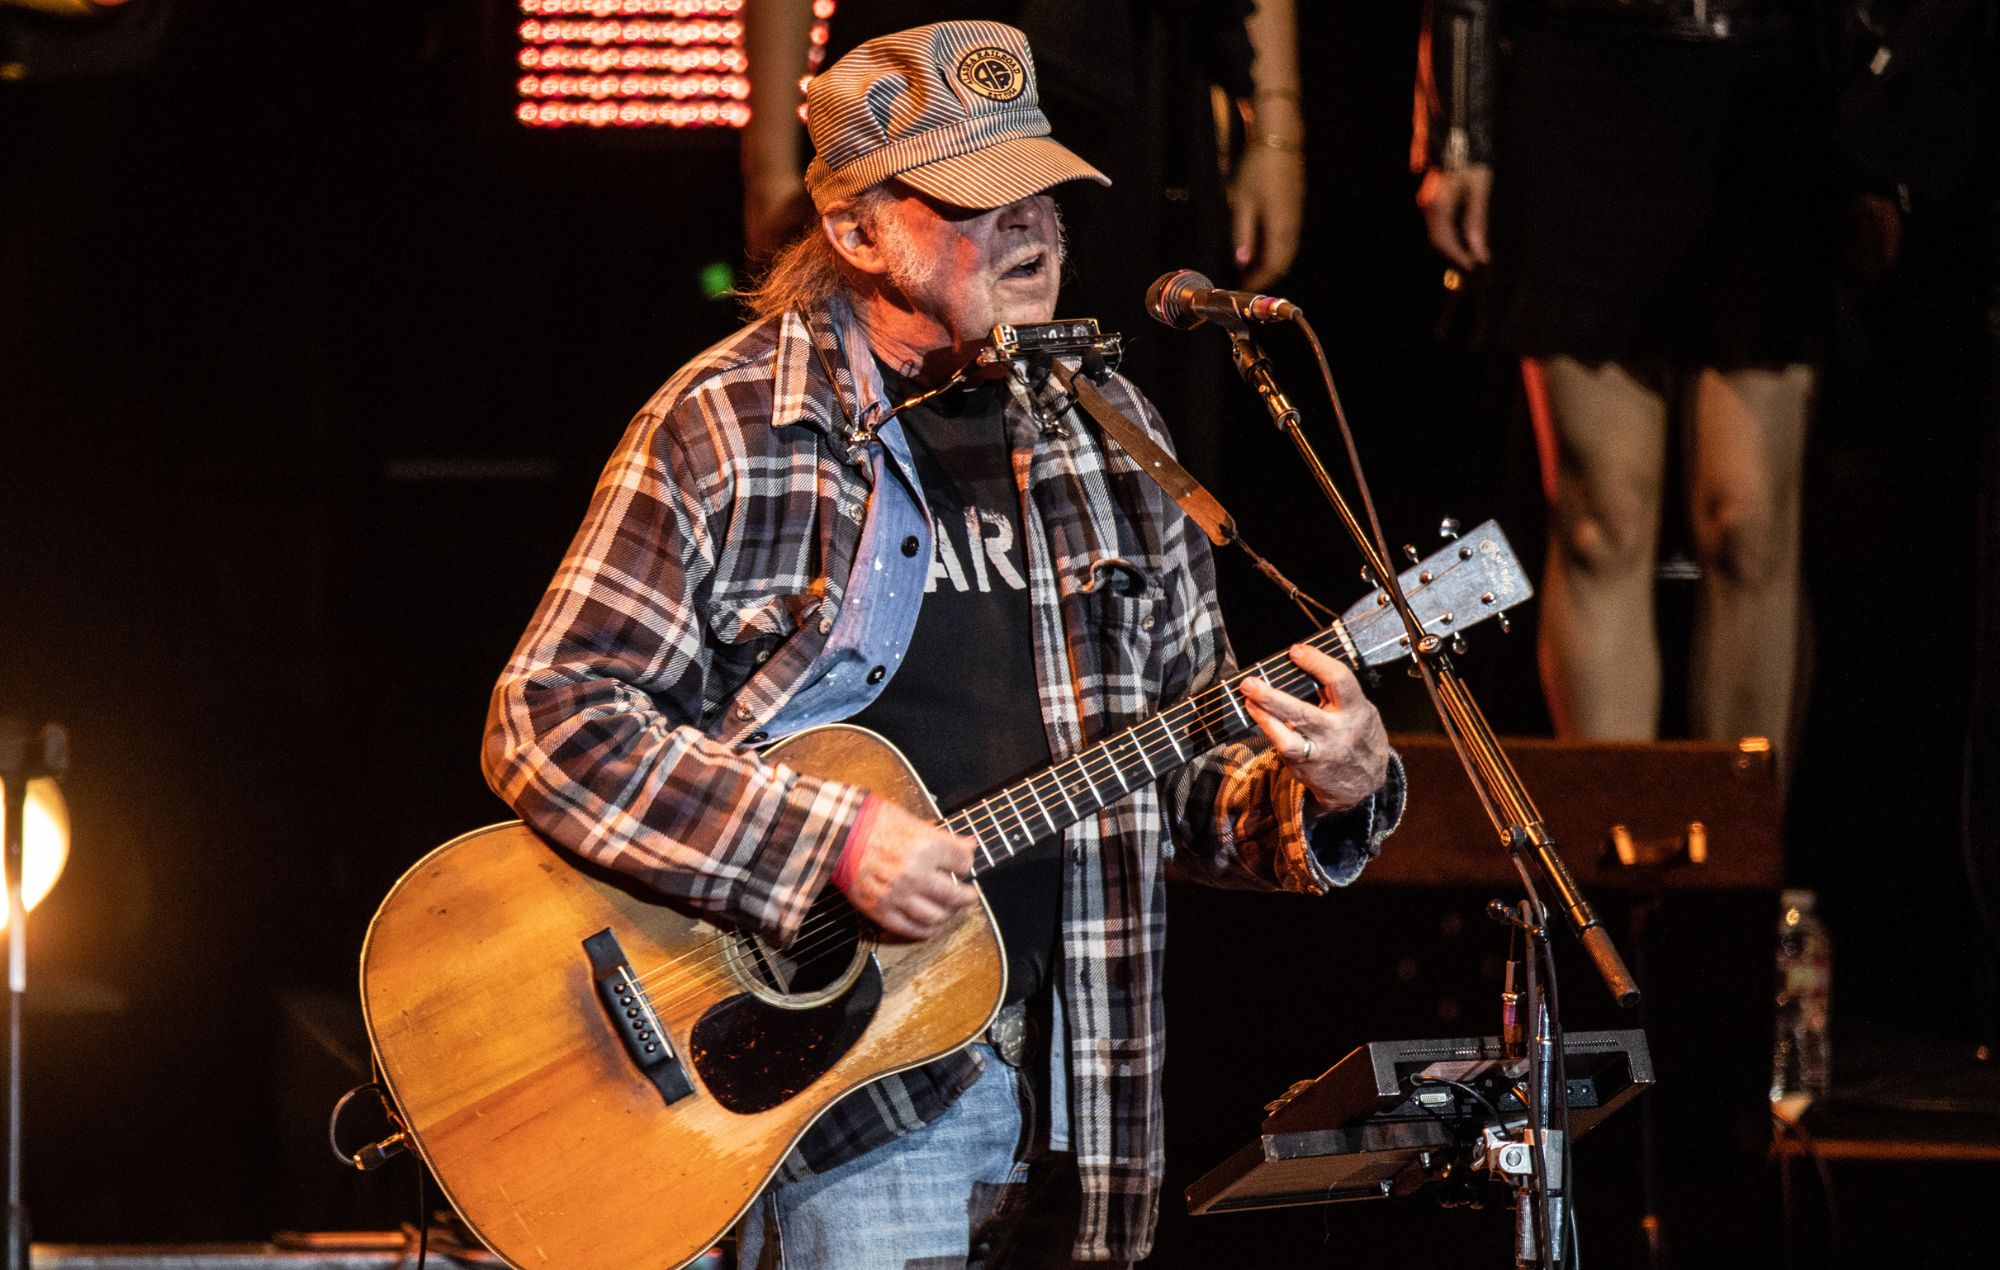 Neil Young performs at the Autism Speaks Light Up The Blues 6 Concert at The Greek Theatre on April 22, 2023 in Los Angeles, California.